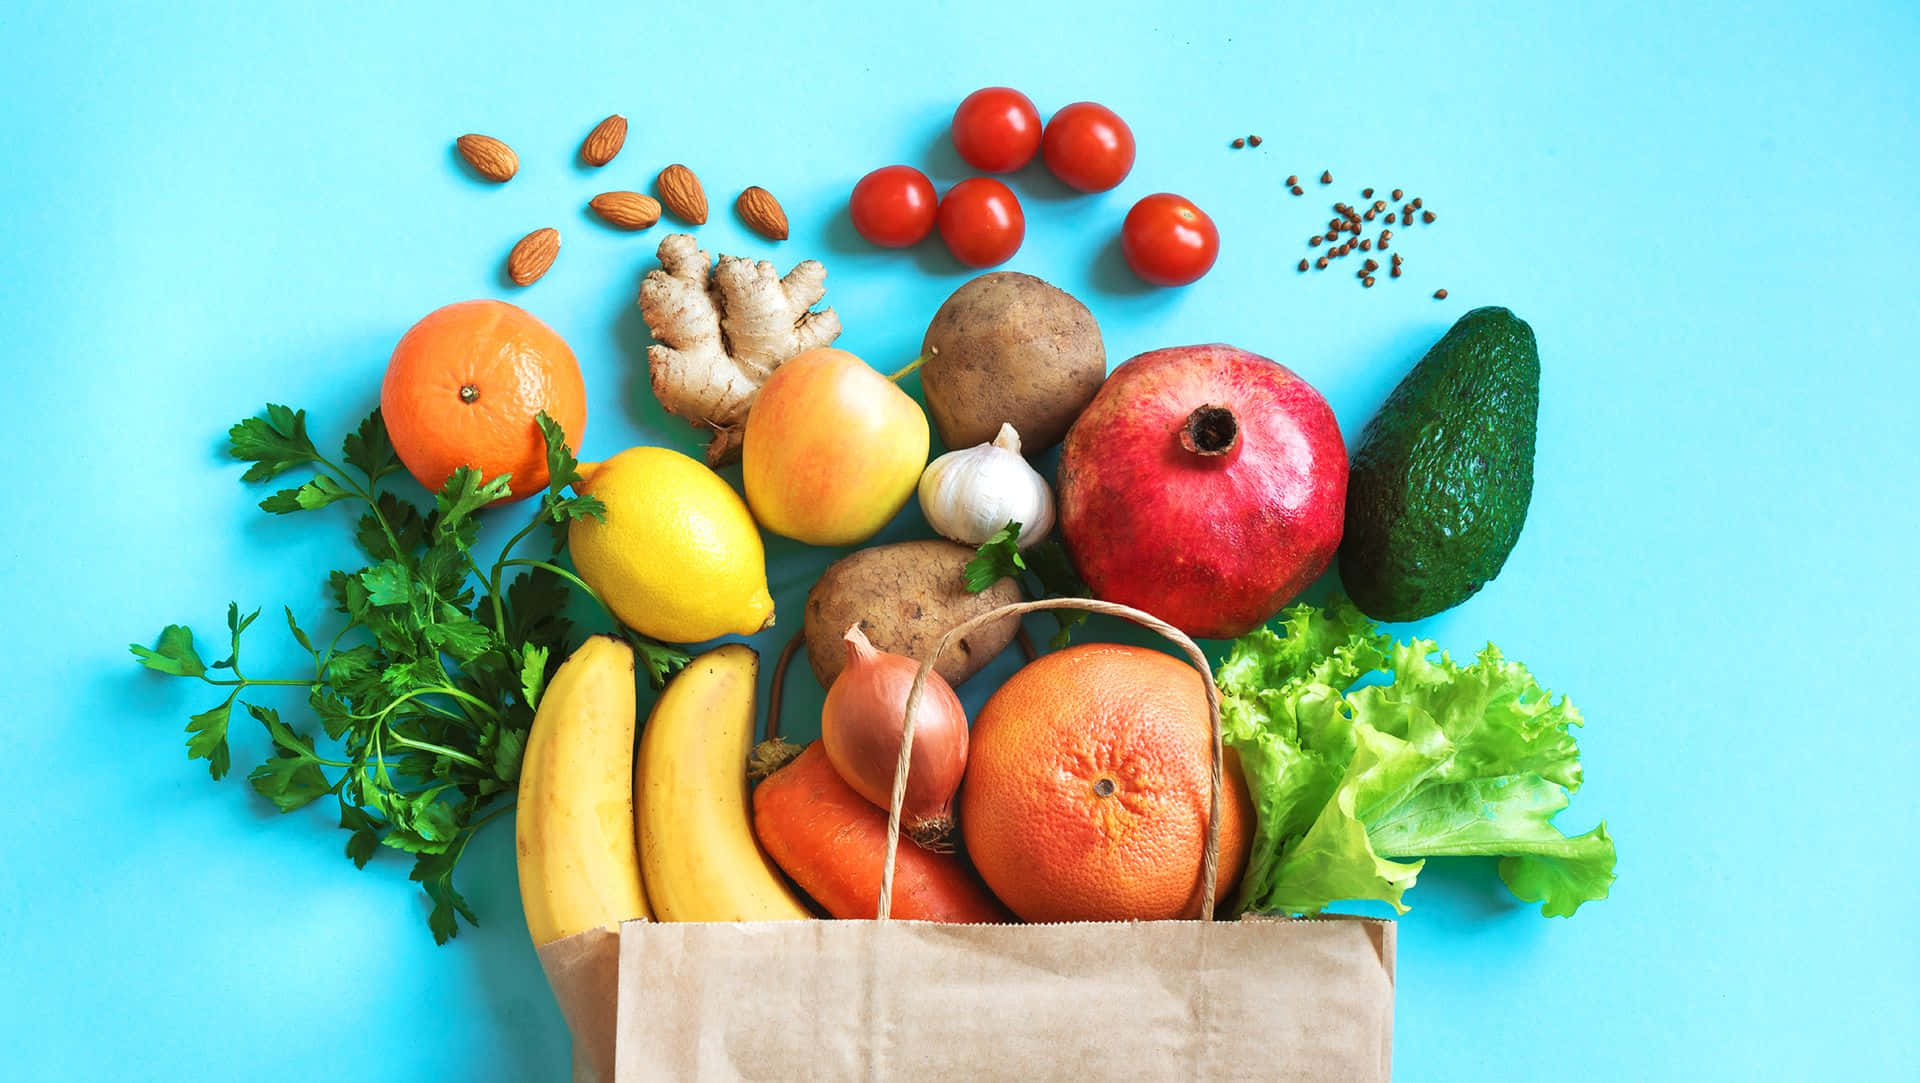 Caption: Vibrant Collection of Fresh Healthy Foods